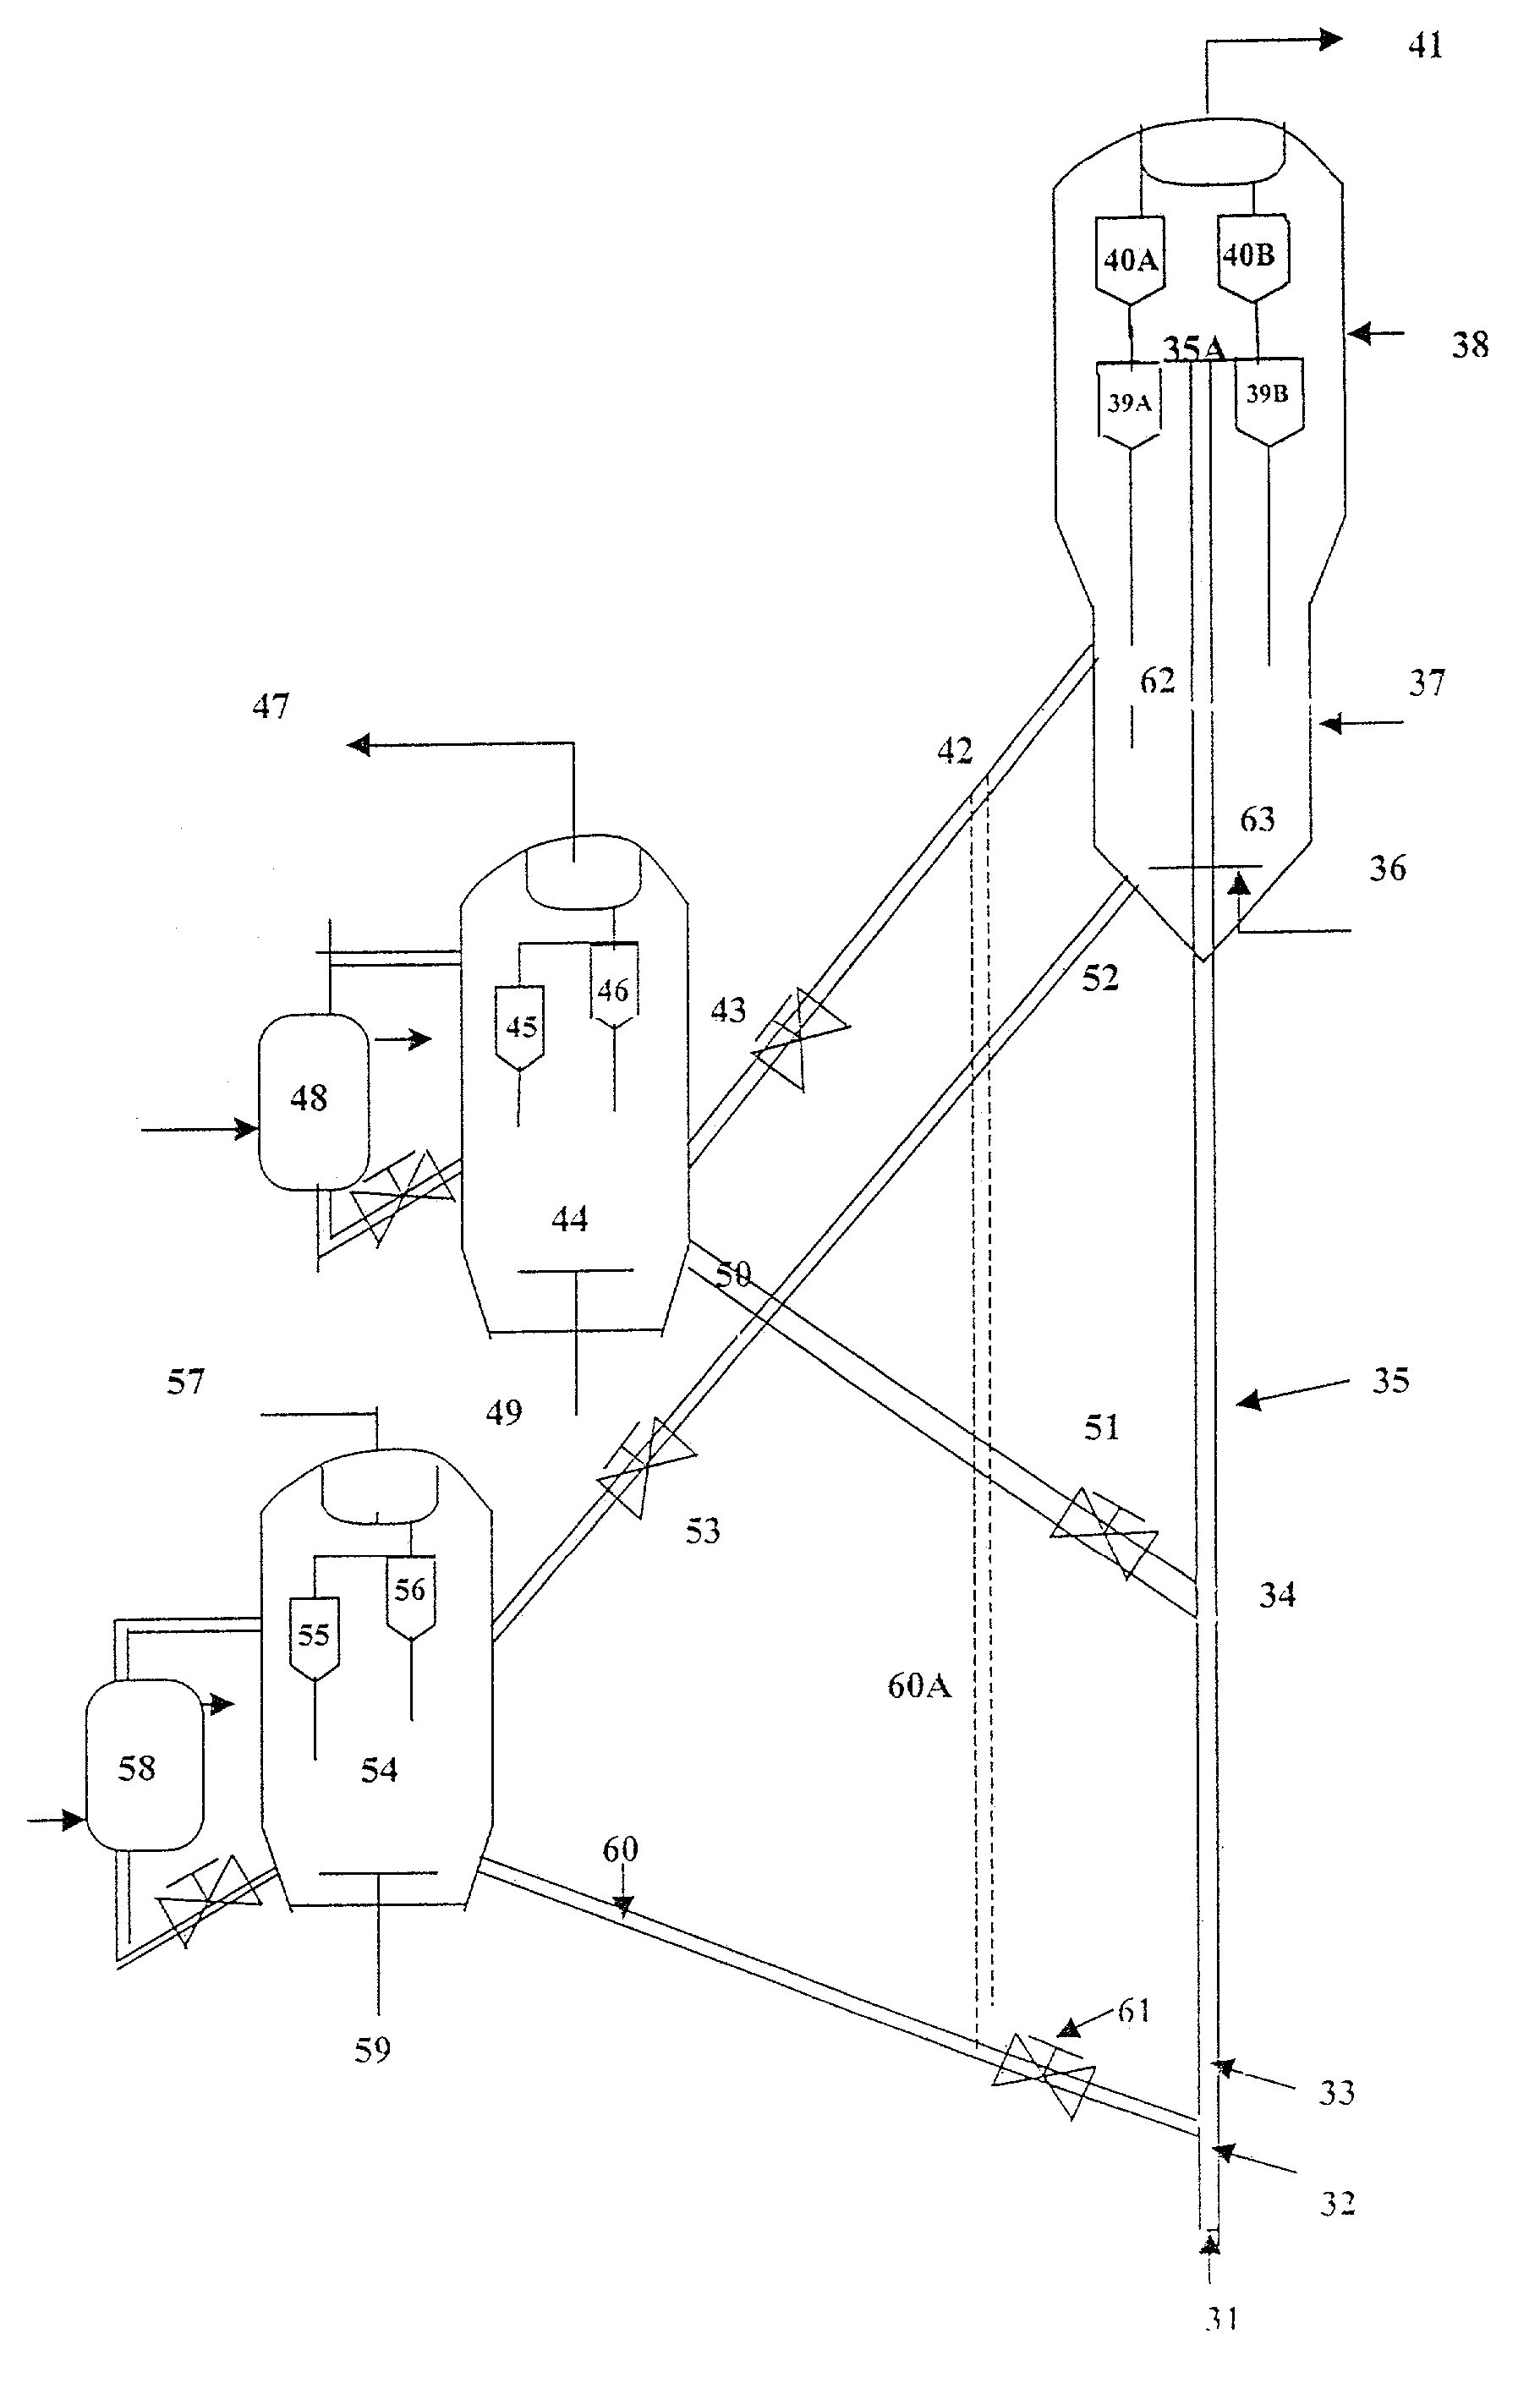 Resid cracking apparatus with catalyst and adsorbent regenerators and a process thereof